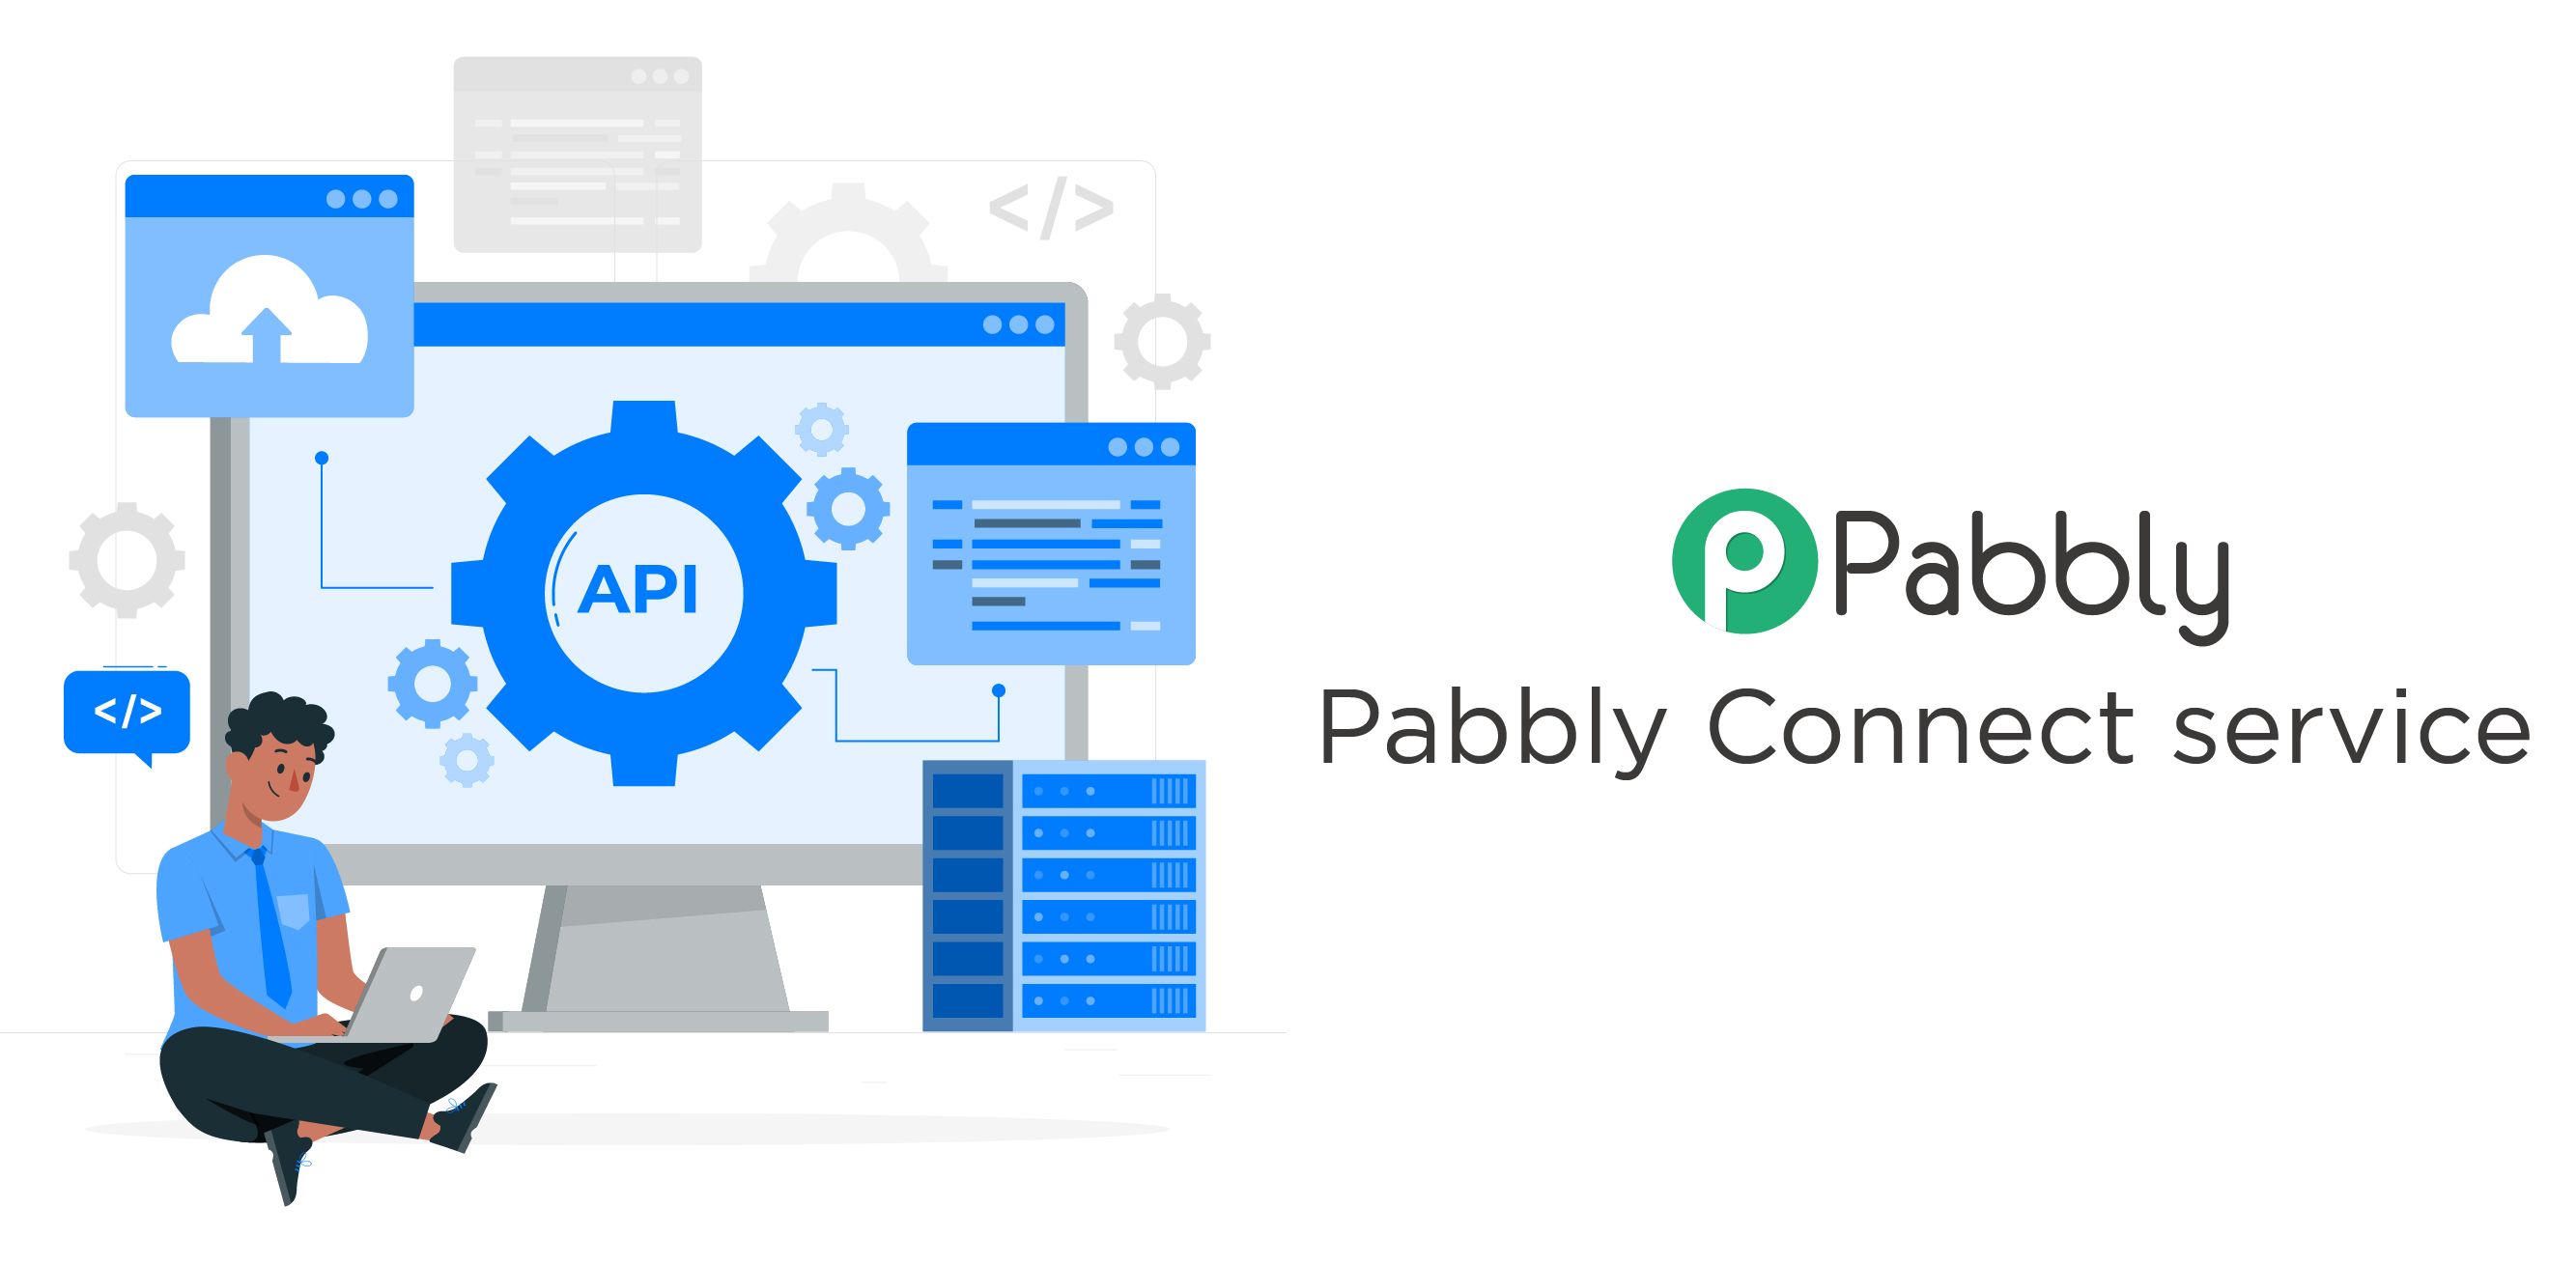 Pabbly Connect service